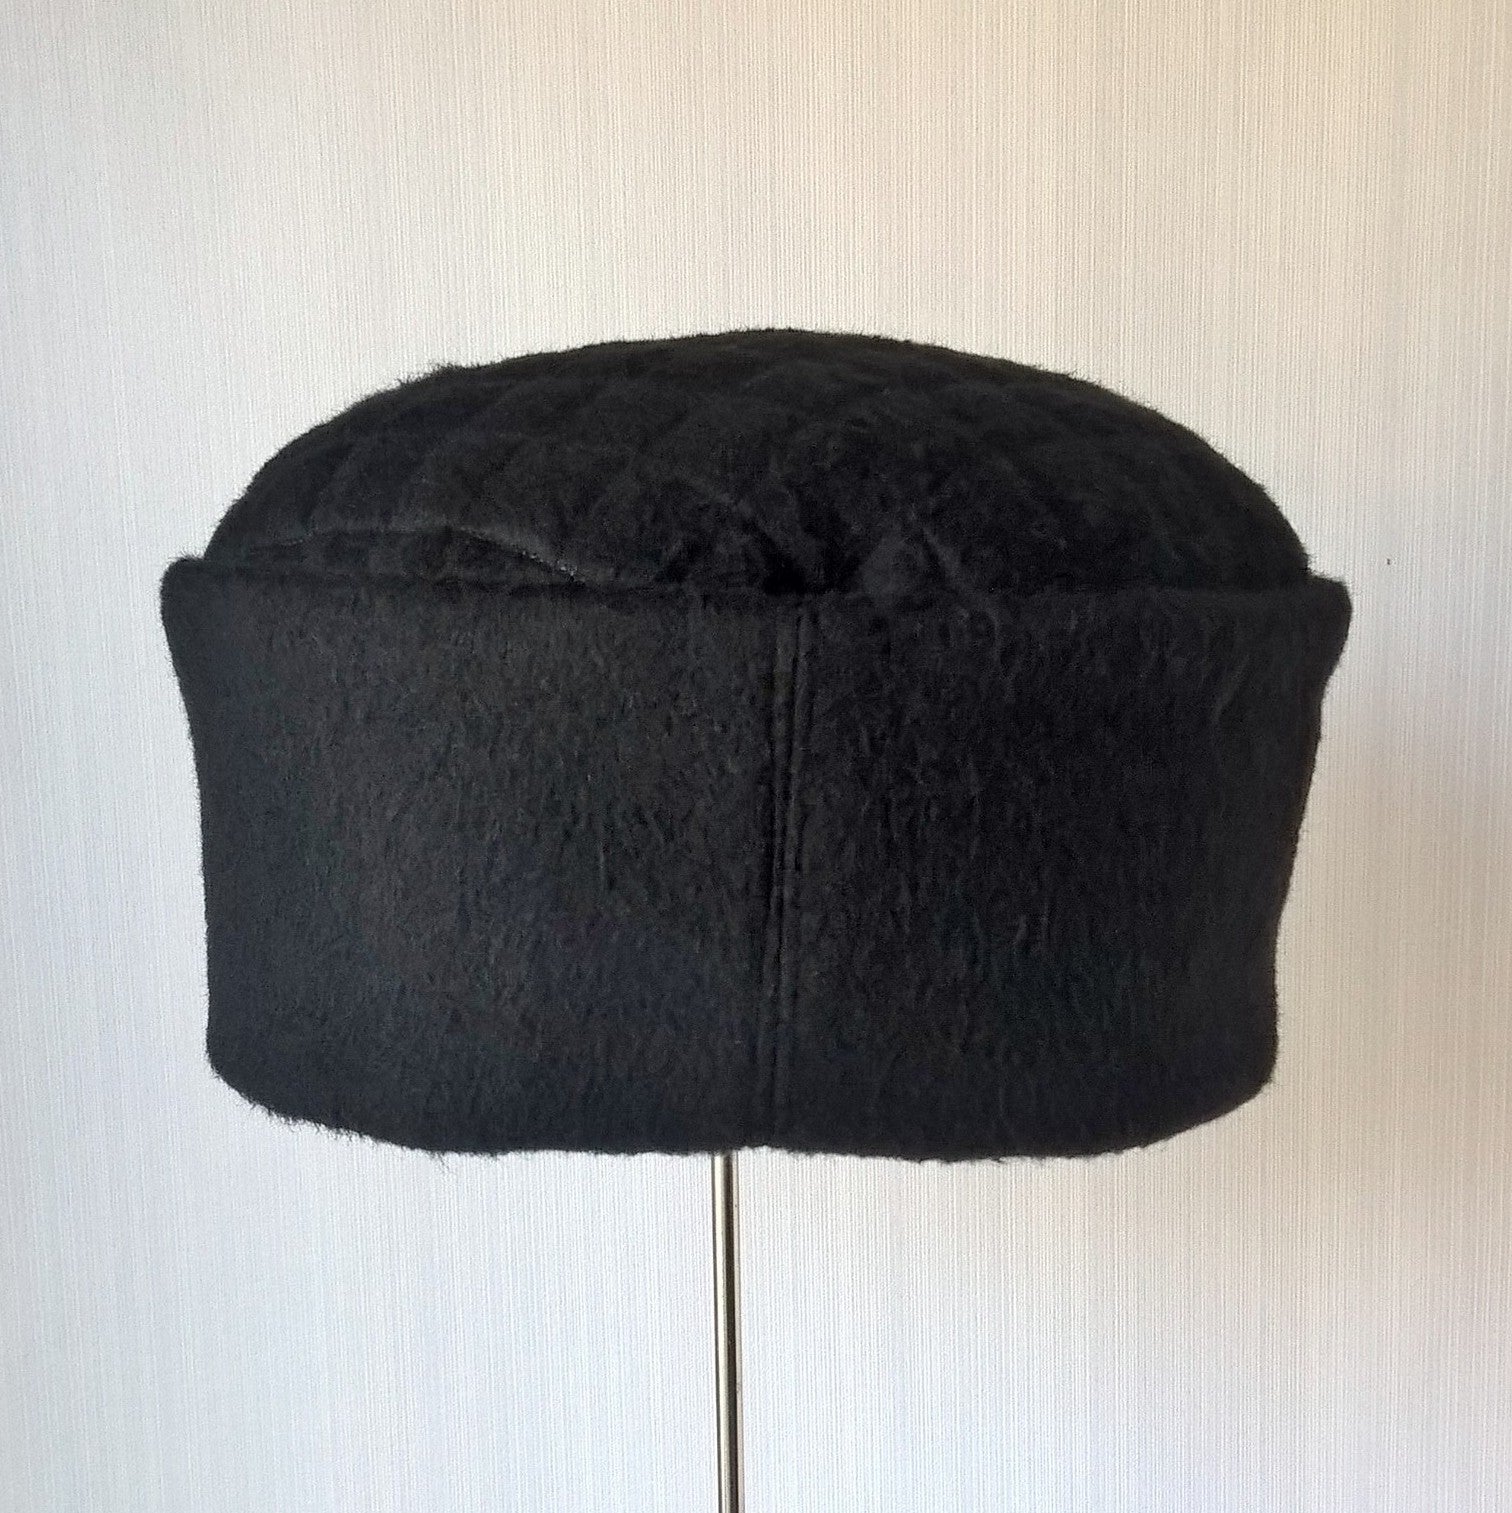 Back view of black cashmere hat